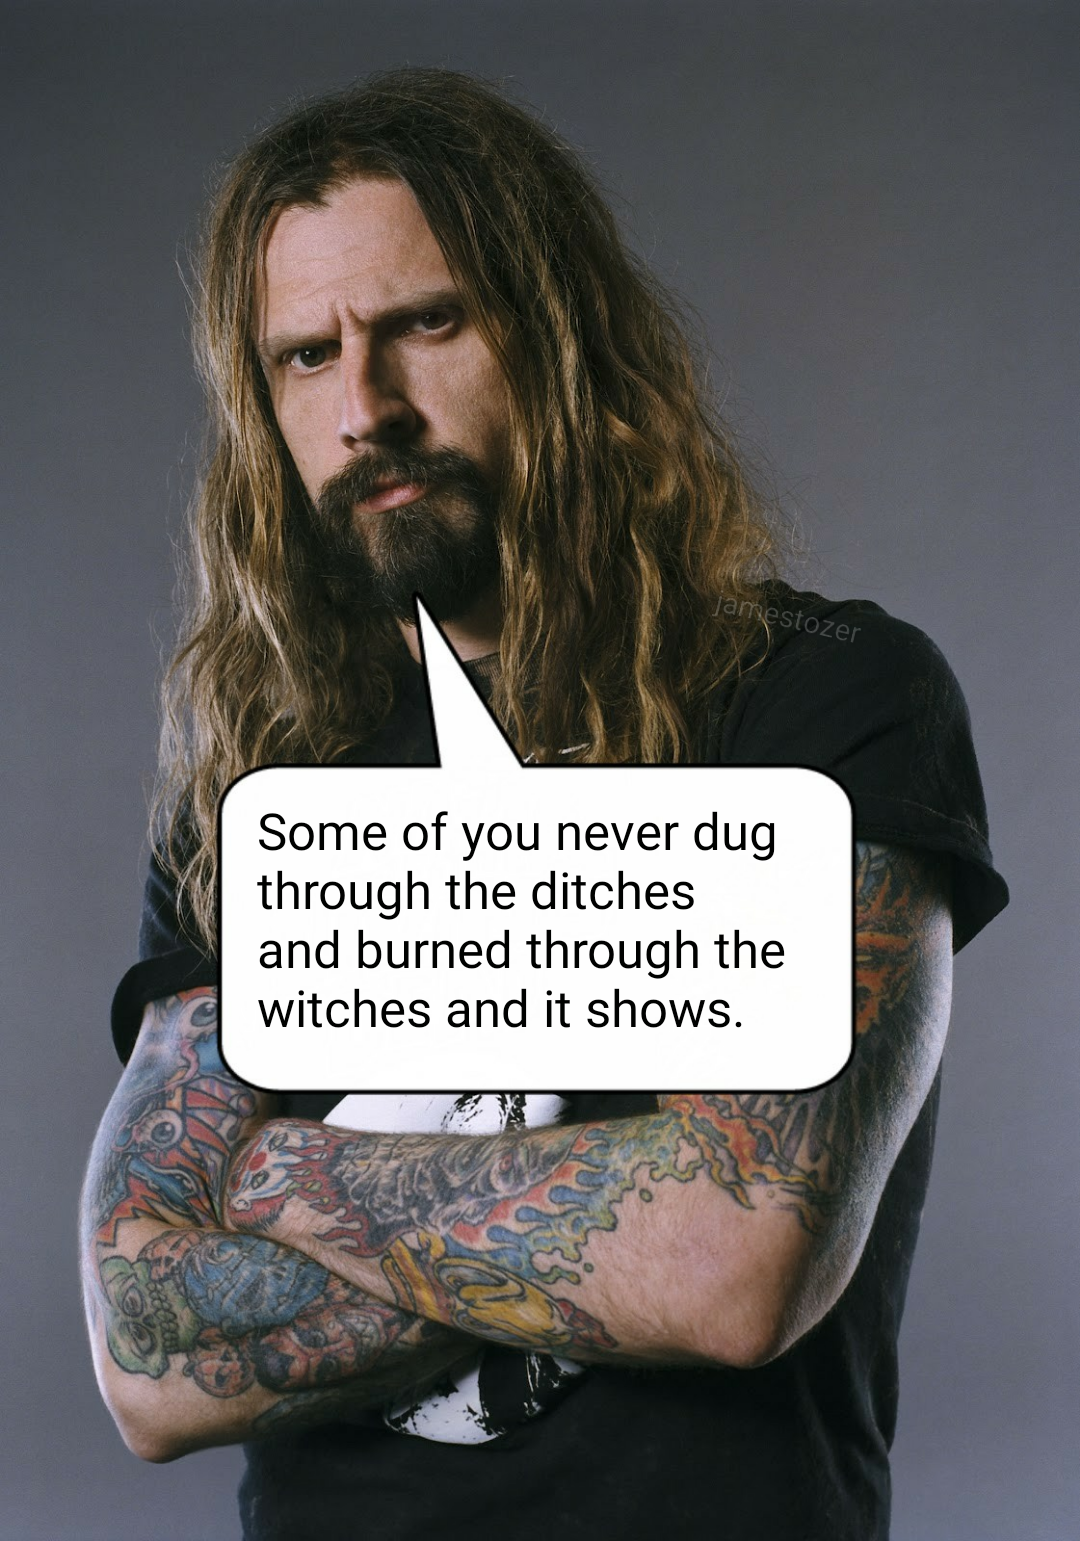 rob zombie - Some of you never dug through the ditches and burned through the witches and it shows.